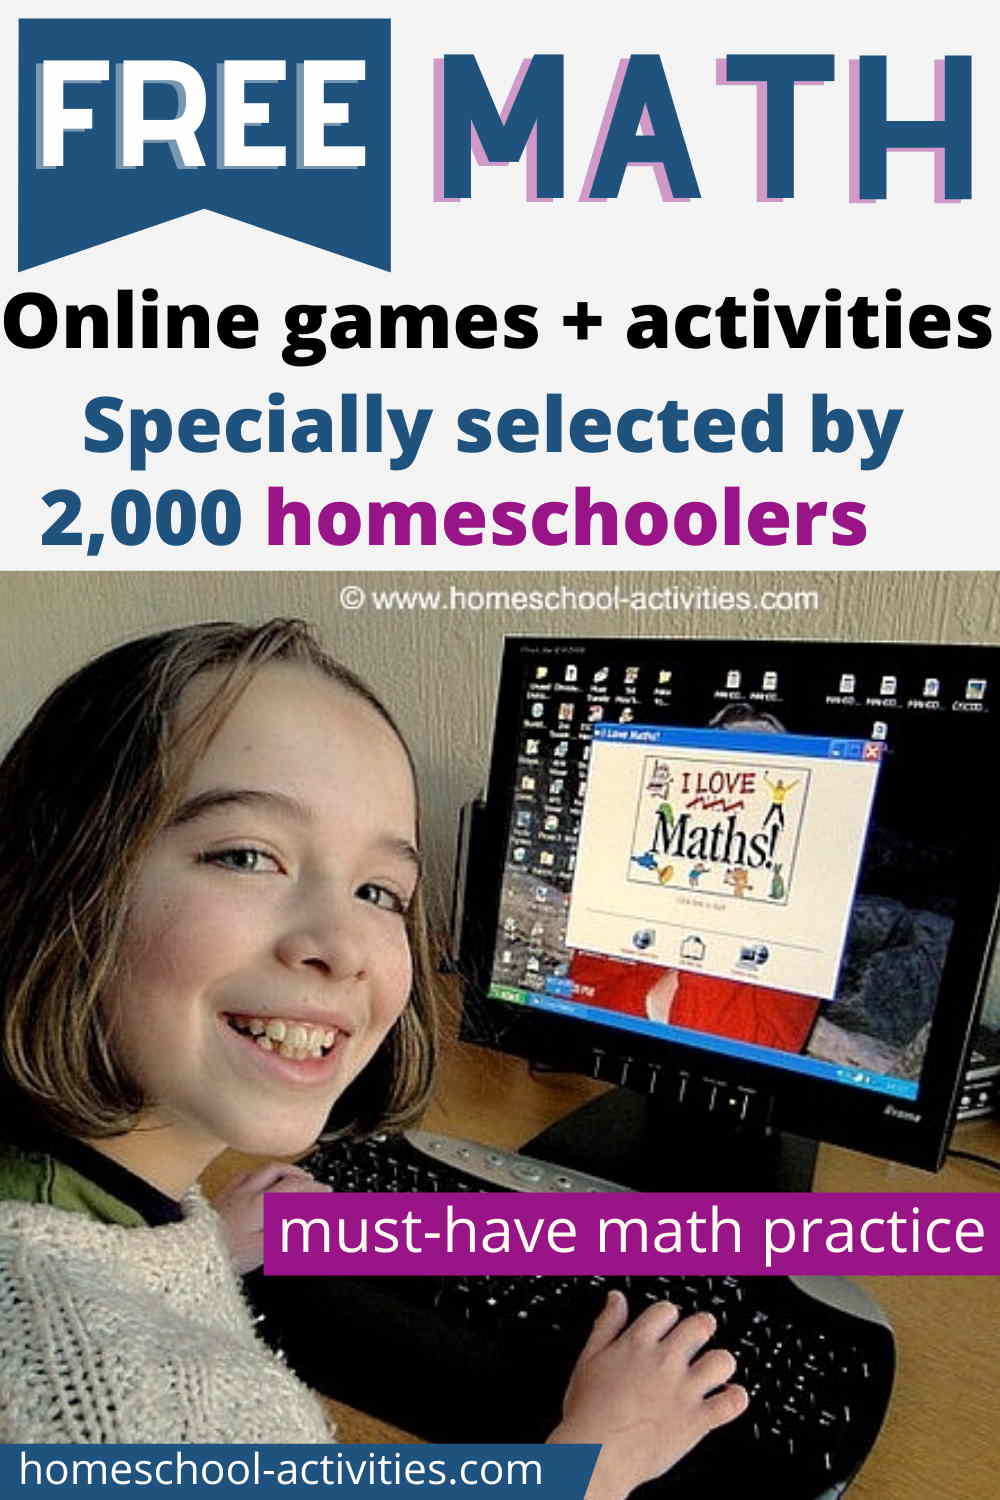 The Best Free Online Games For Kids